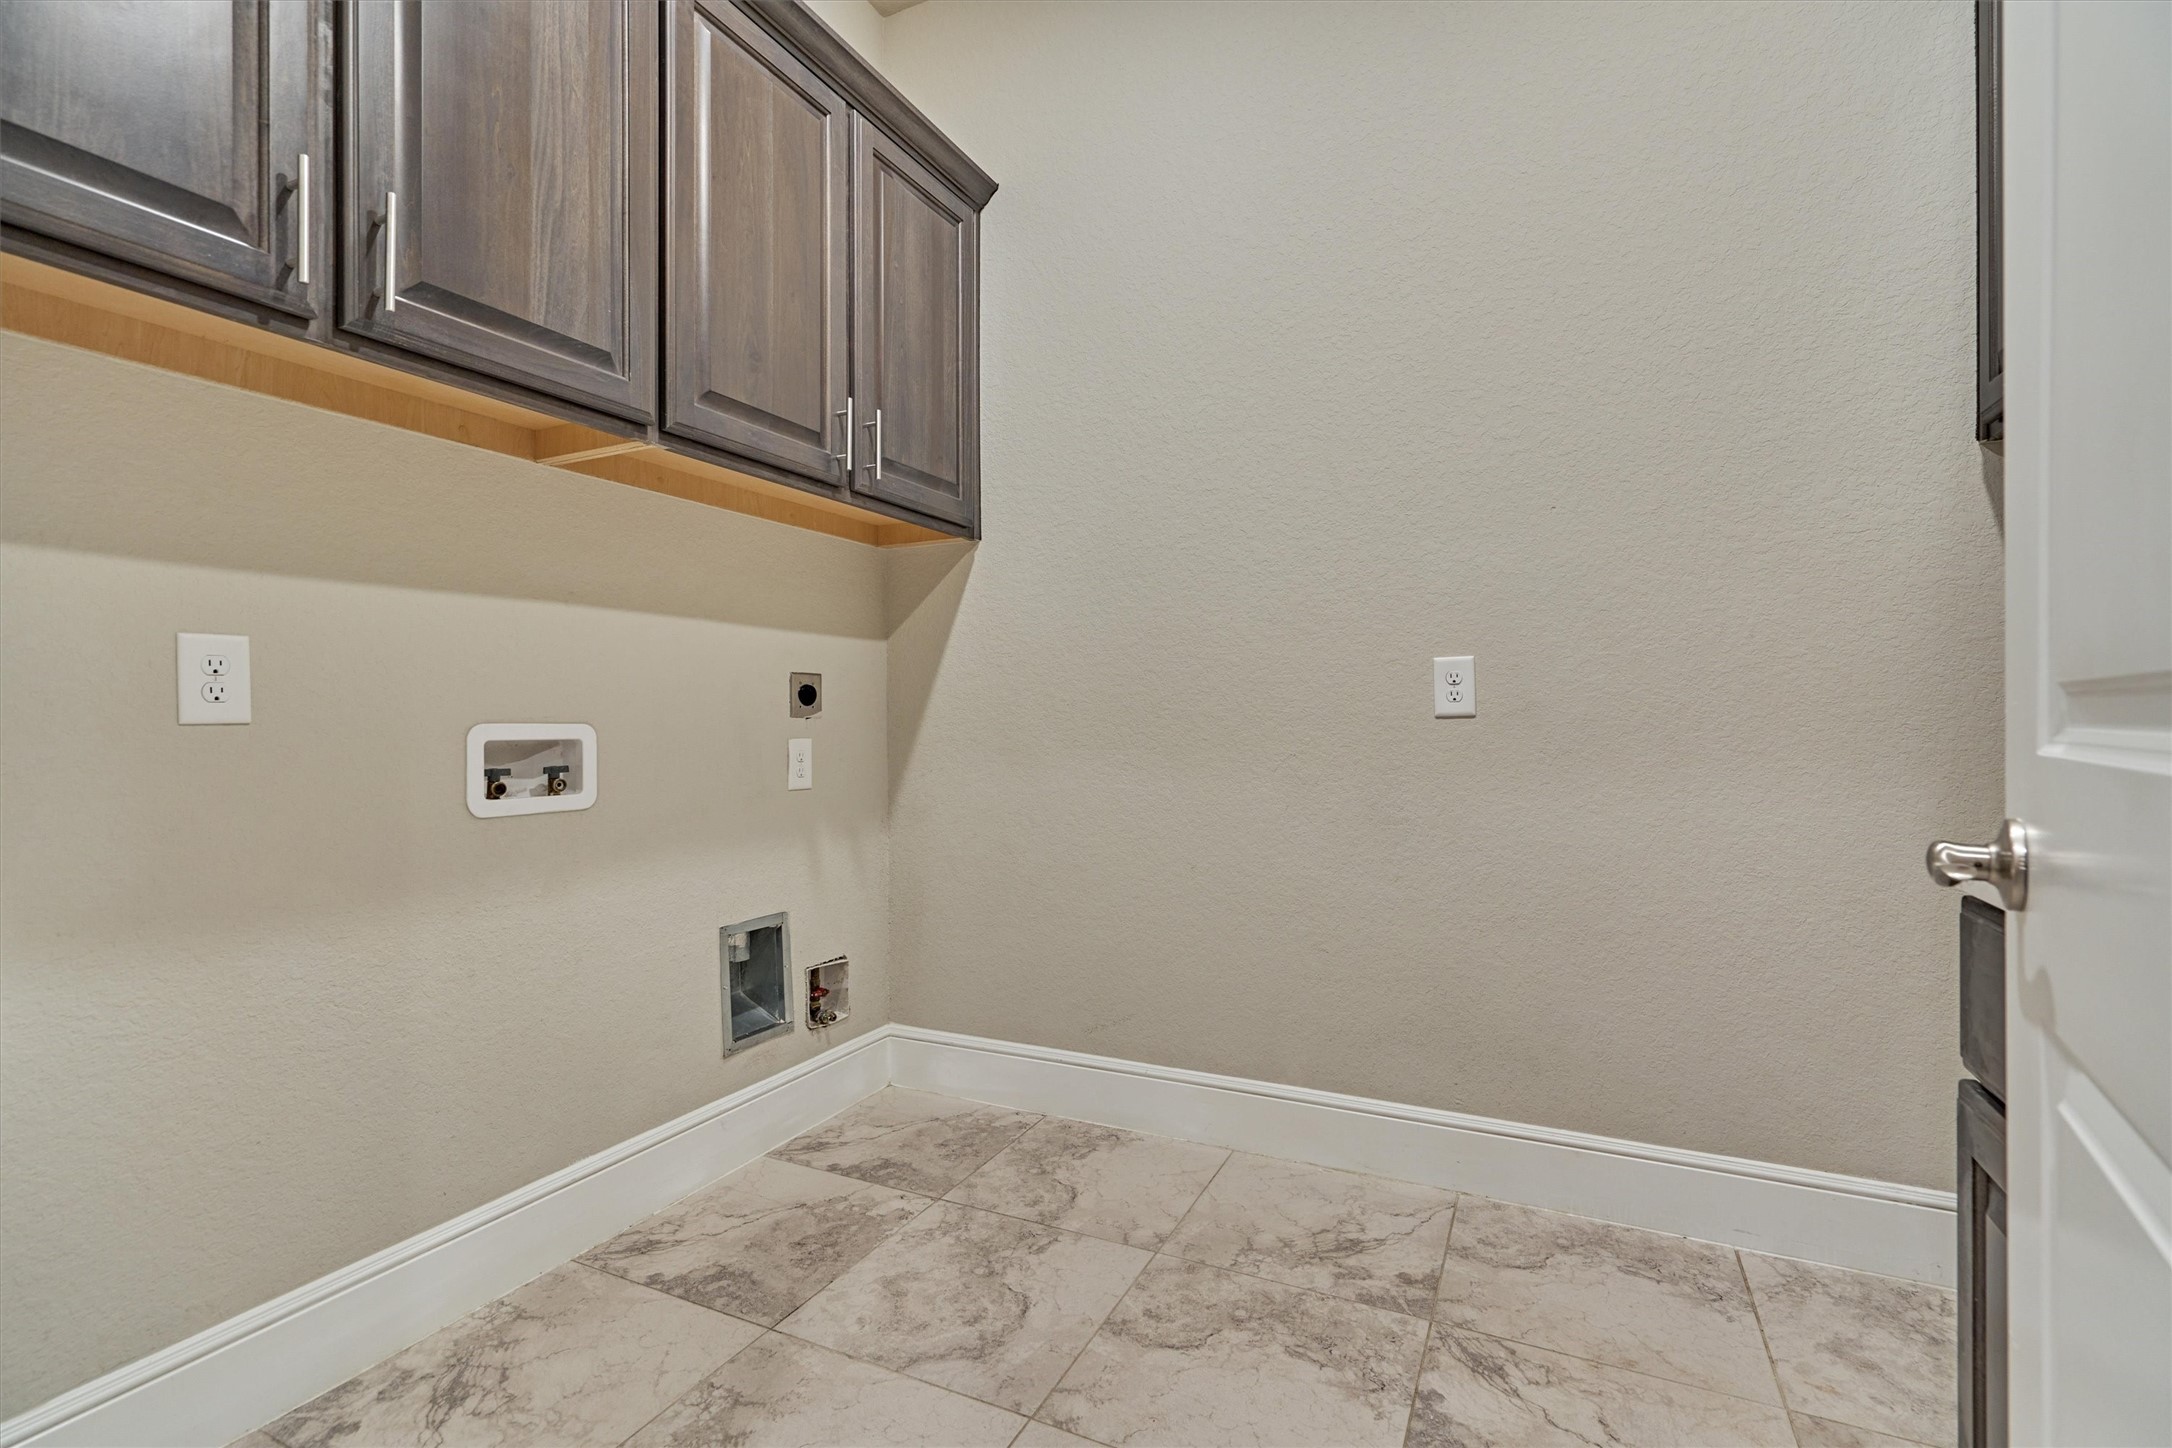 A spacious laundry room with washer and dryer connections, perfect for busy households.
